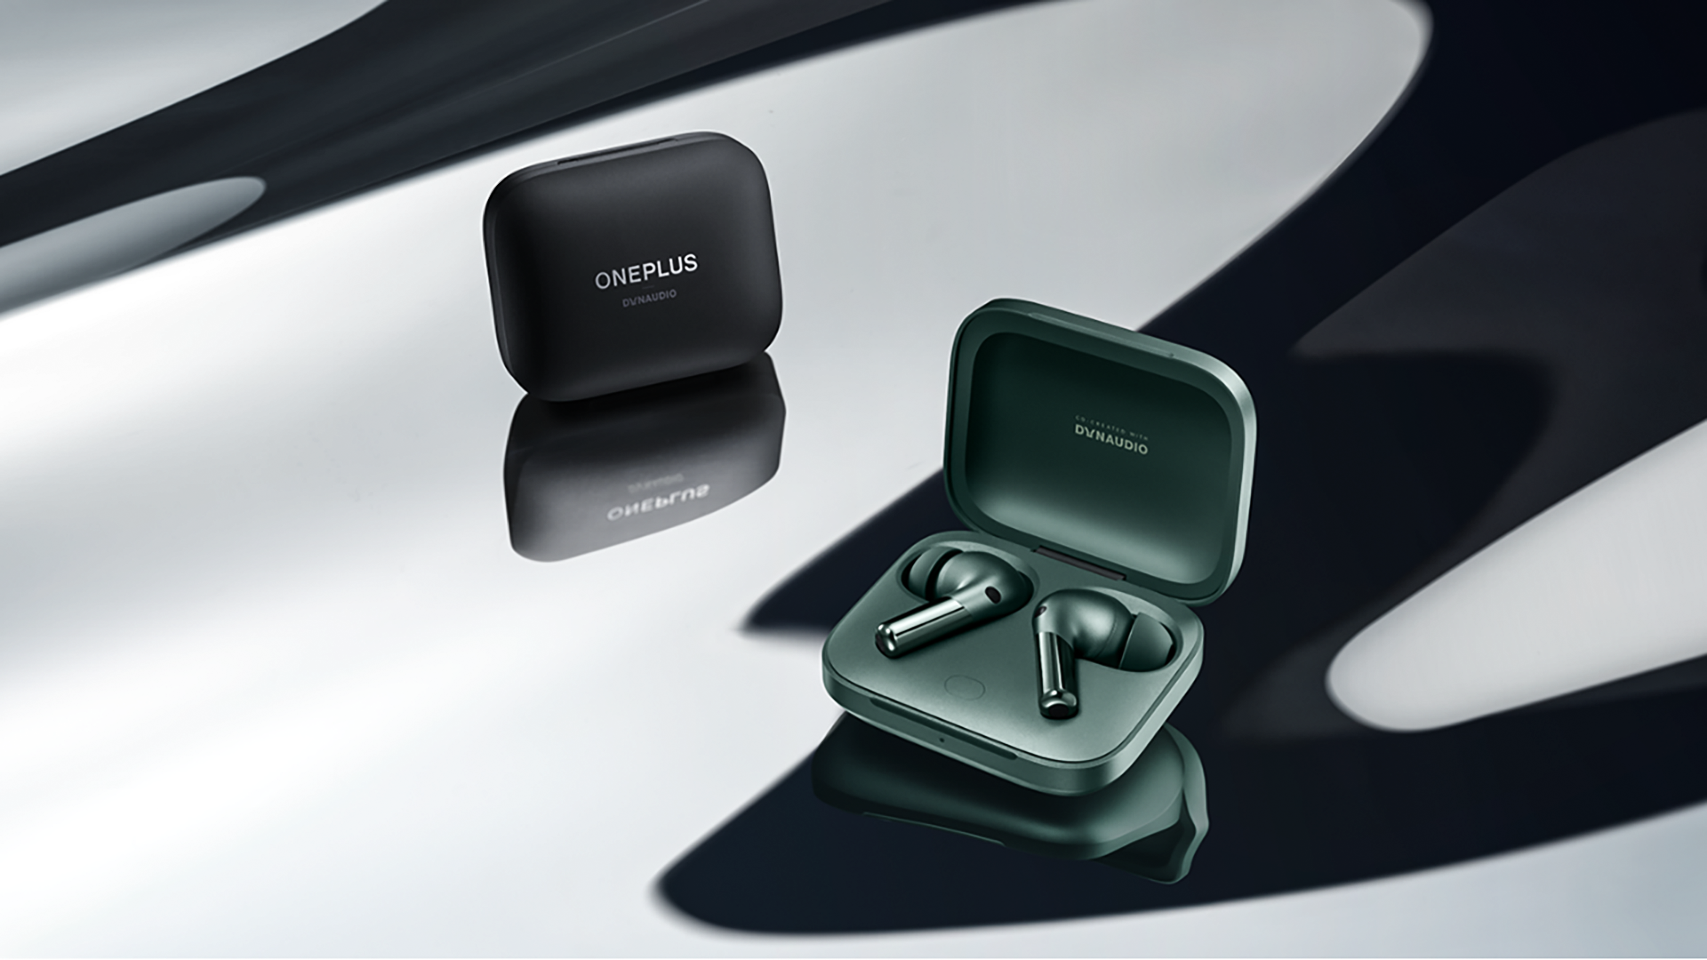 Oppo OnePlus Buds Pro 2 noise cancelling Bluetooth earbuds in green and black color options with spatial audio LHDC 5.0